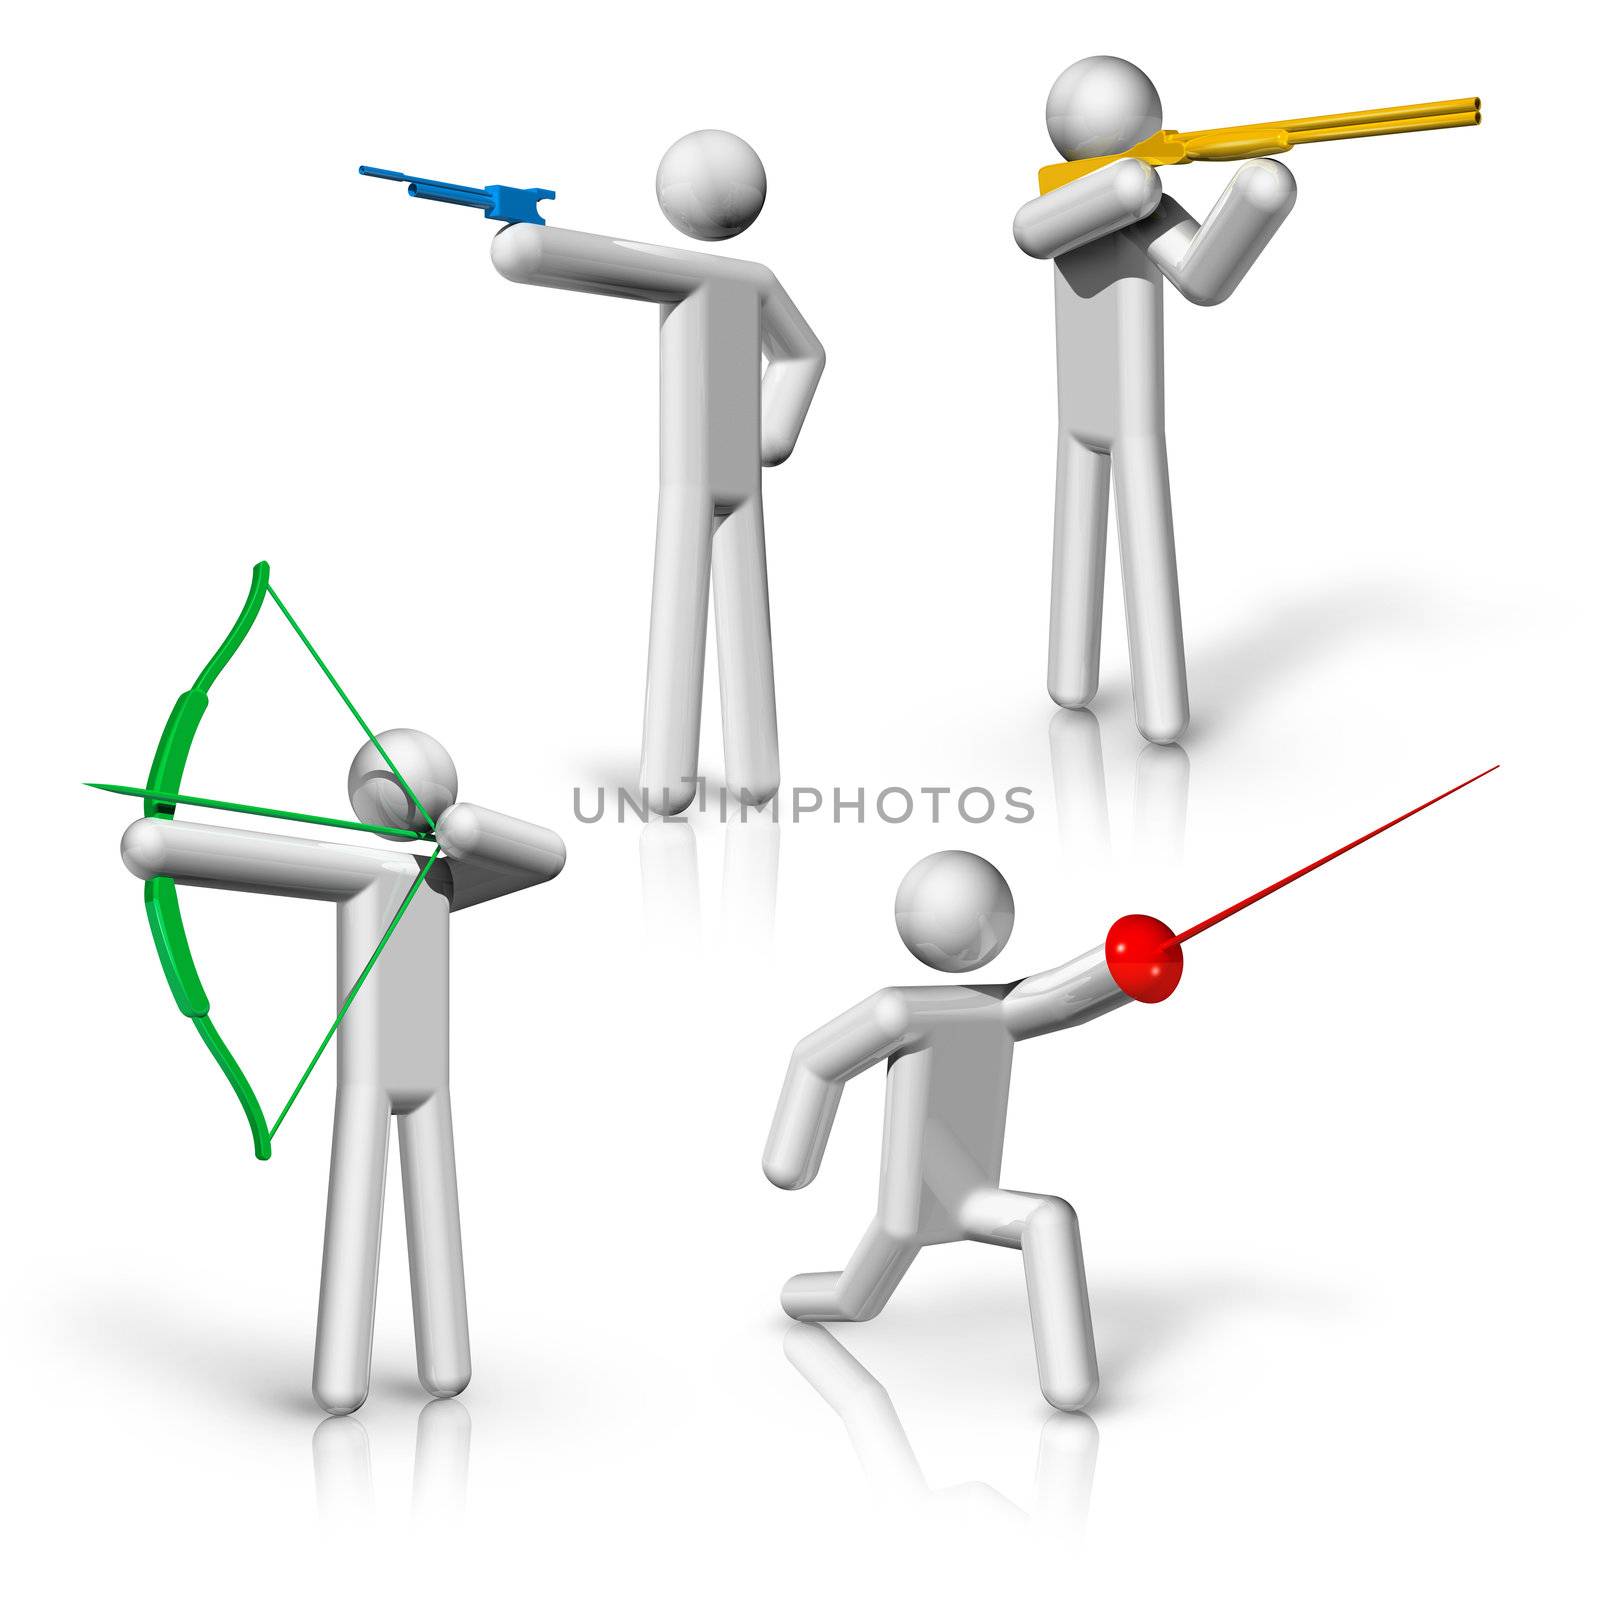 sports symbols icons series 1 on 9, Shooting, archery, fencing